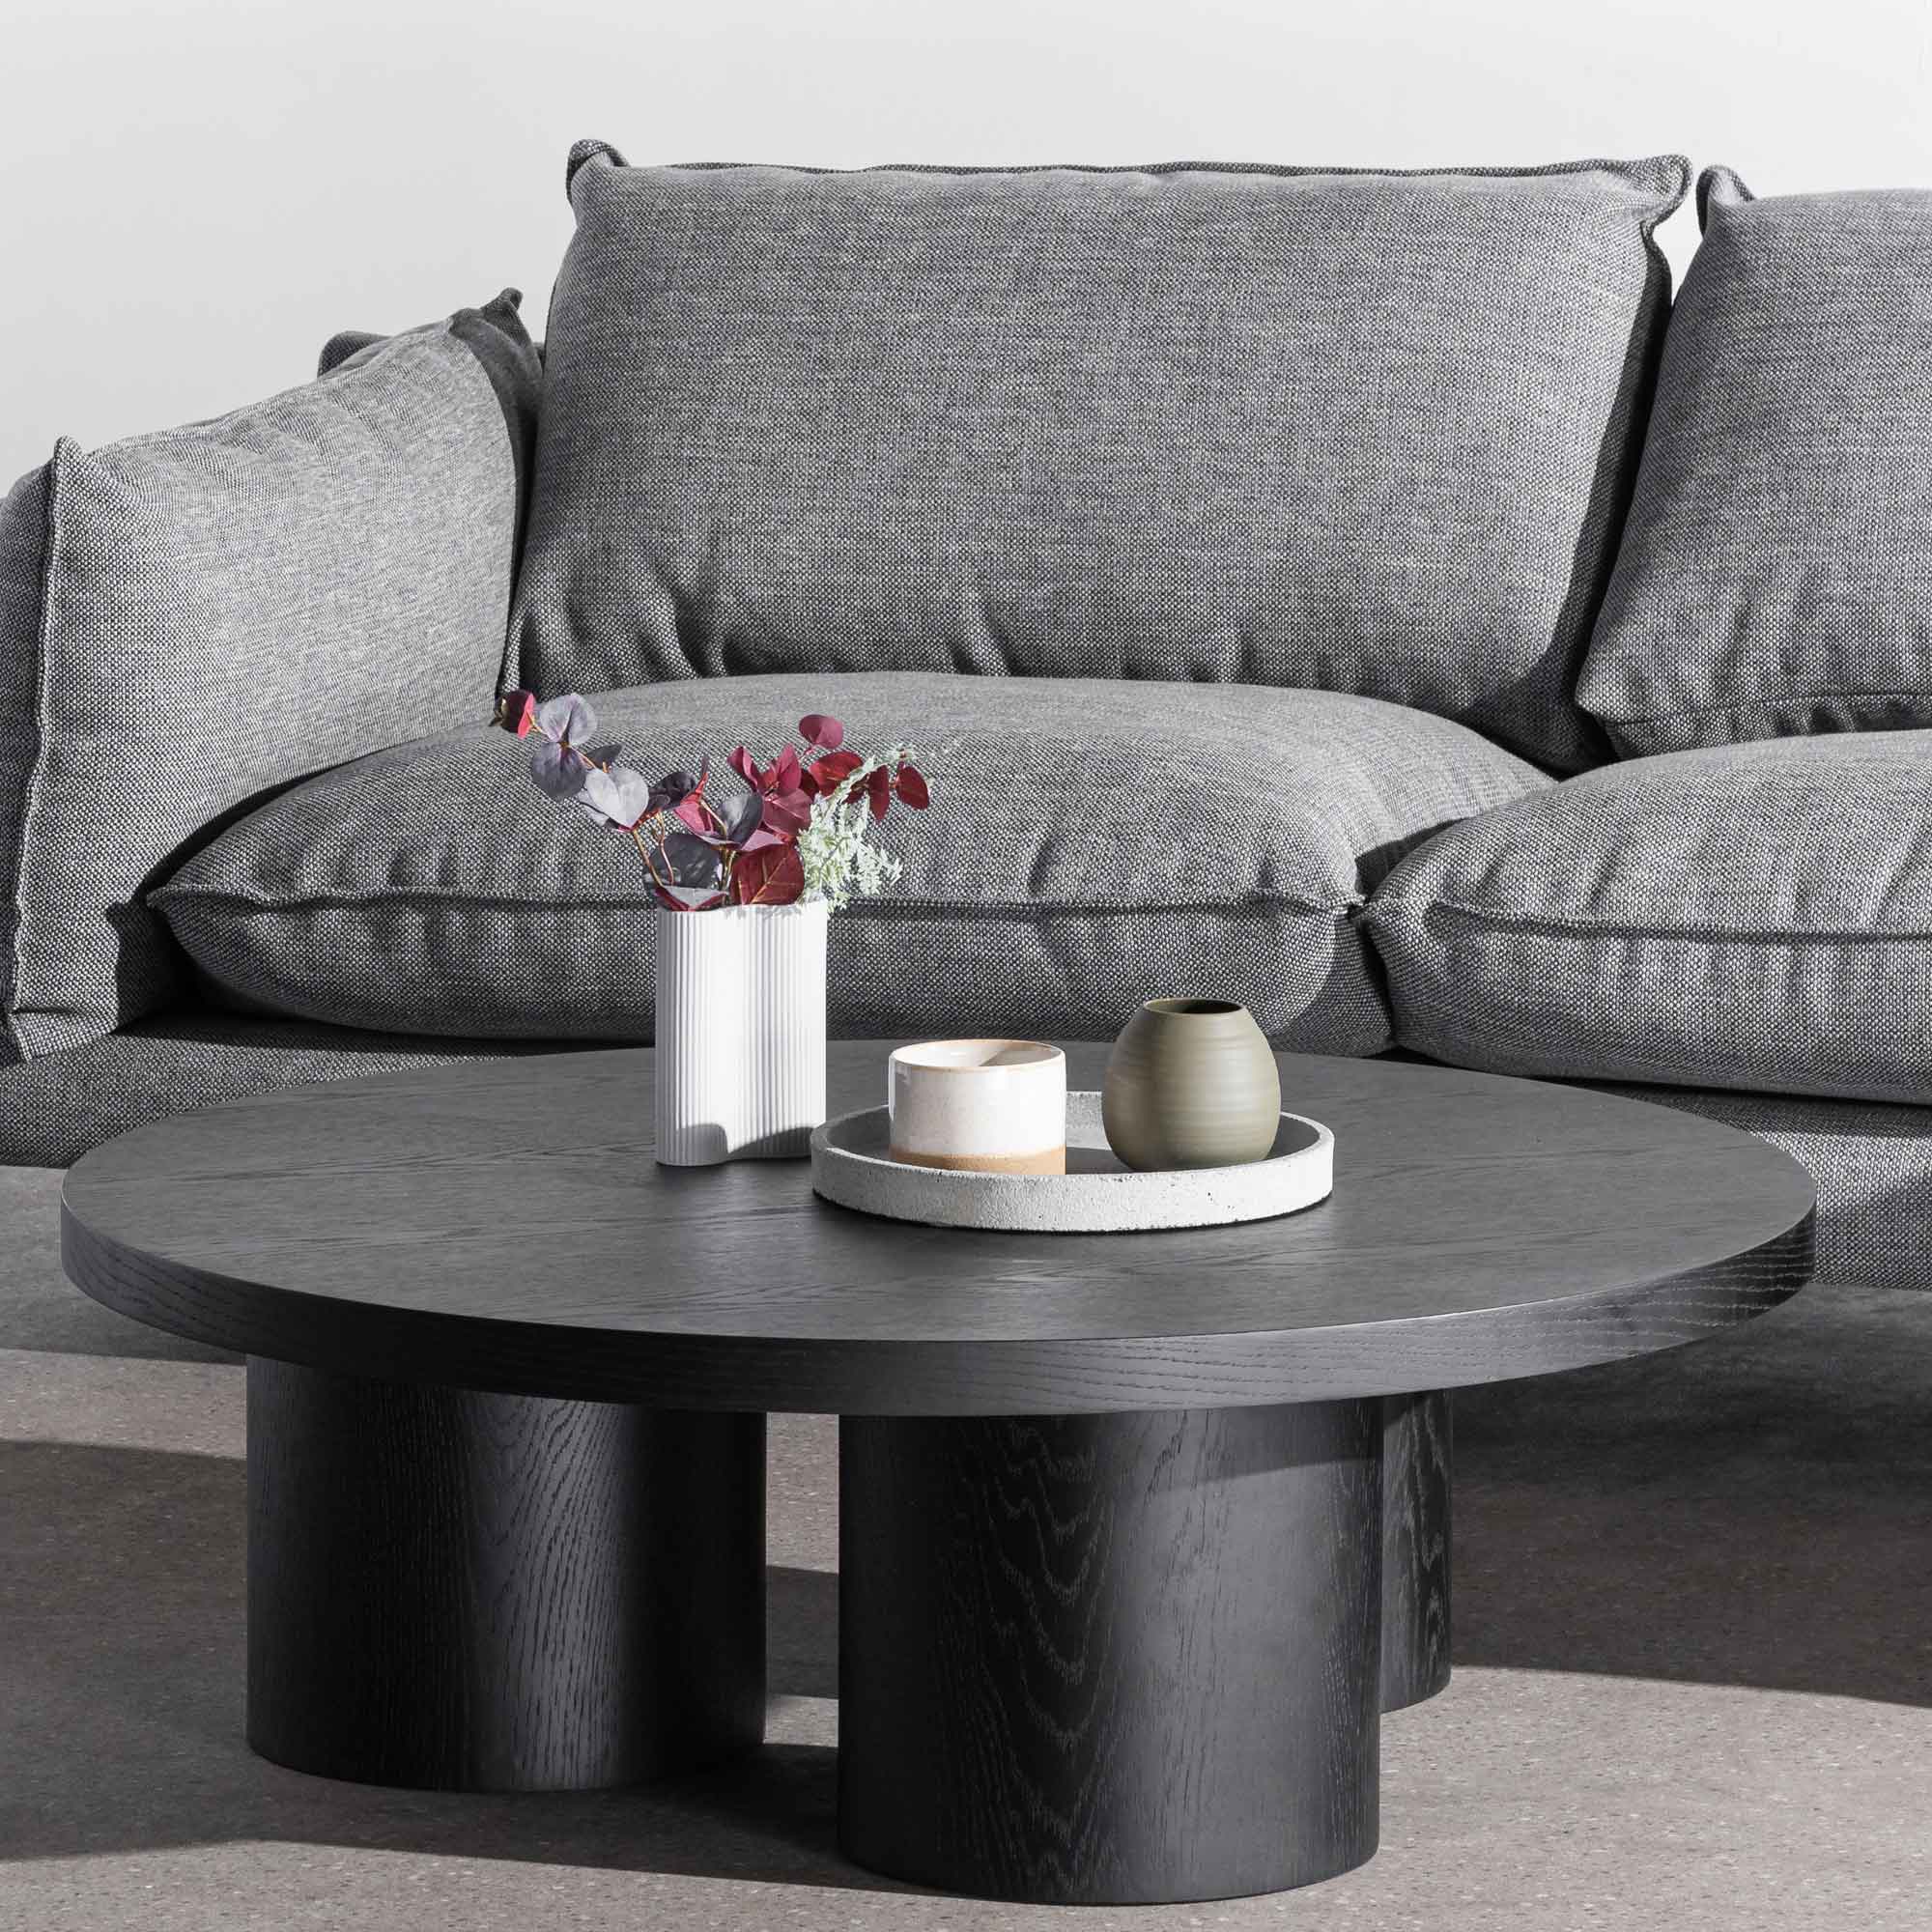 Siena Wooden Round Coffee Table - Coffee Table